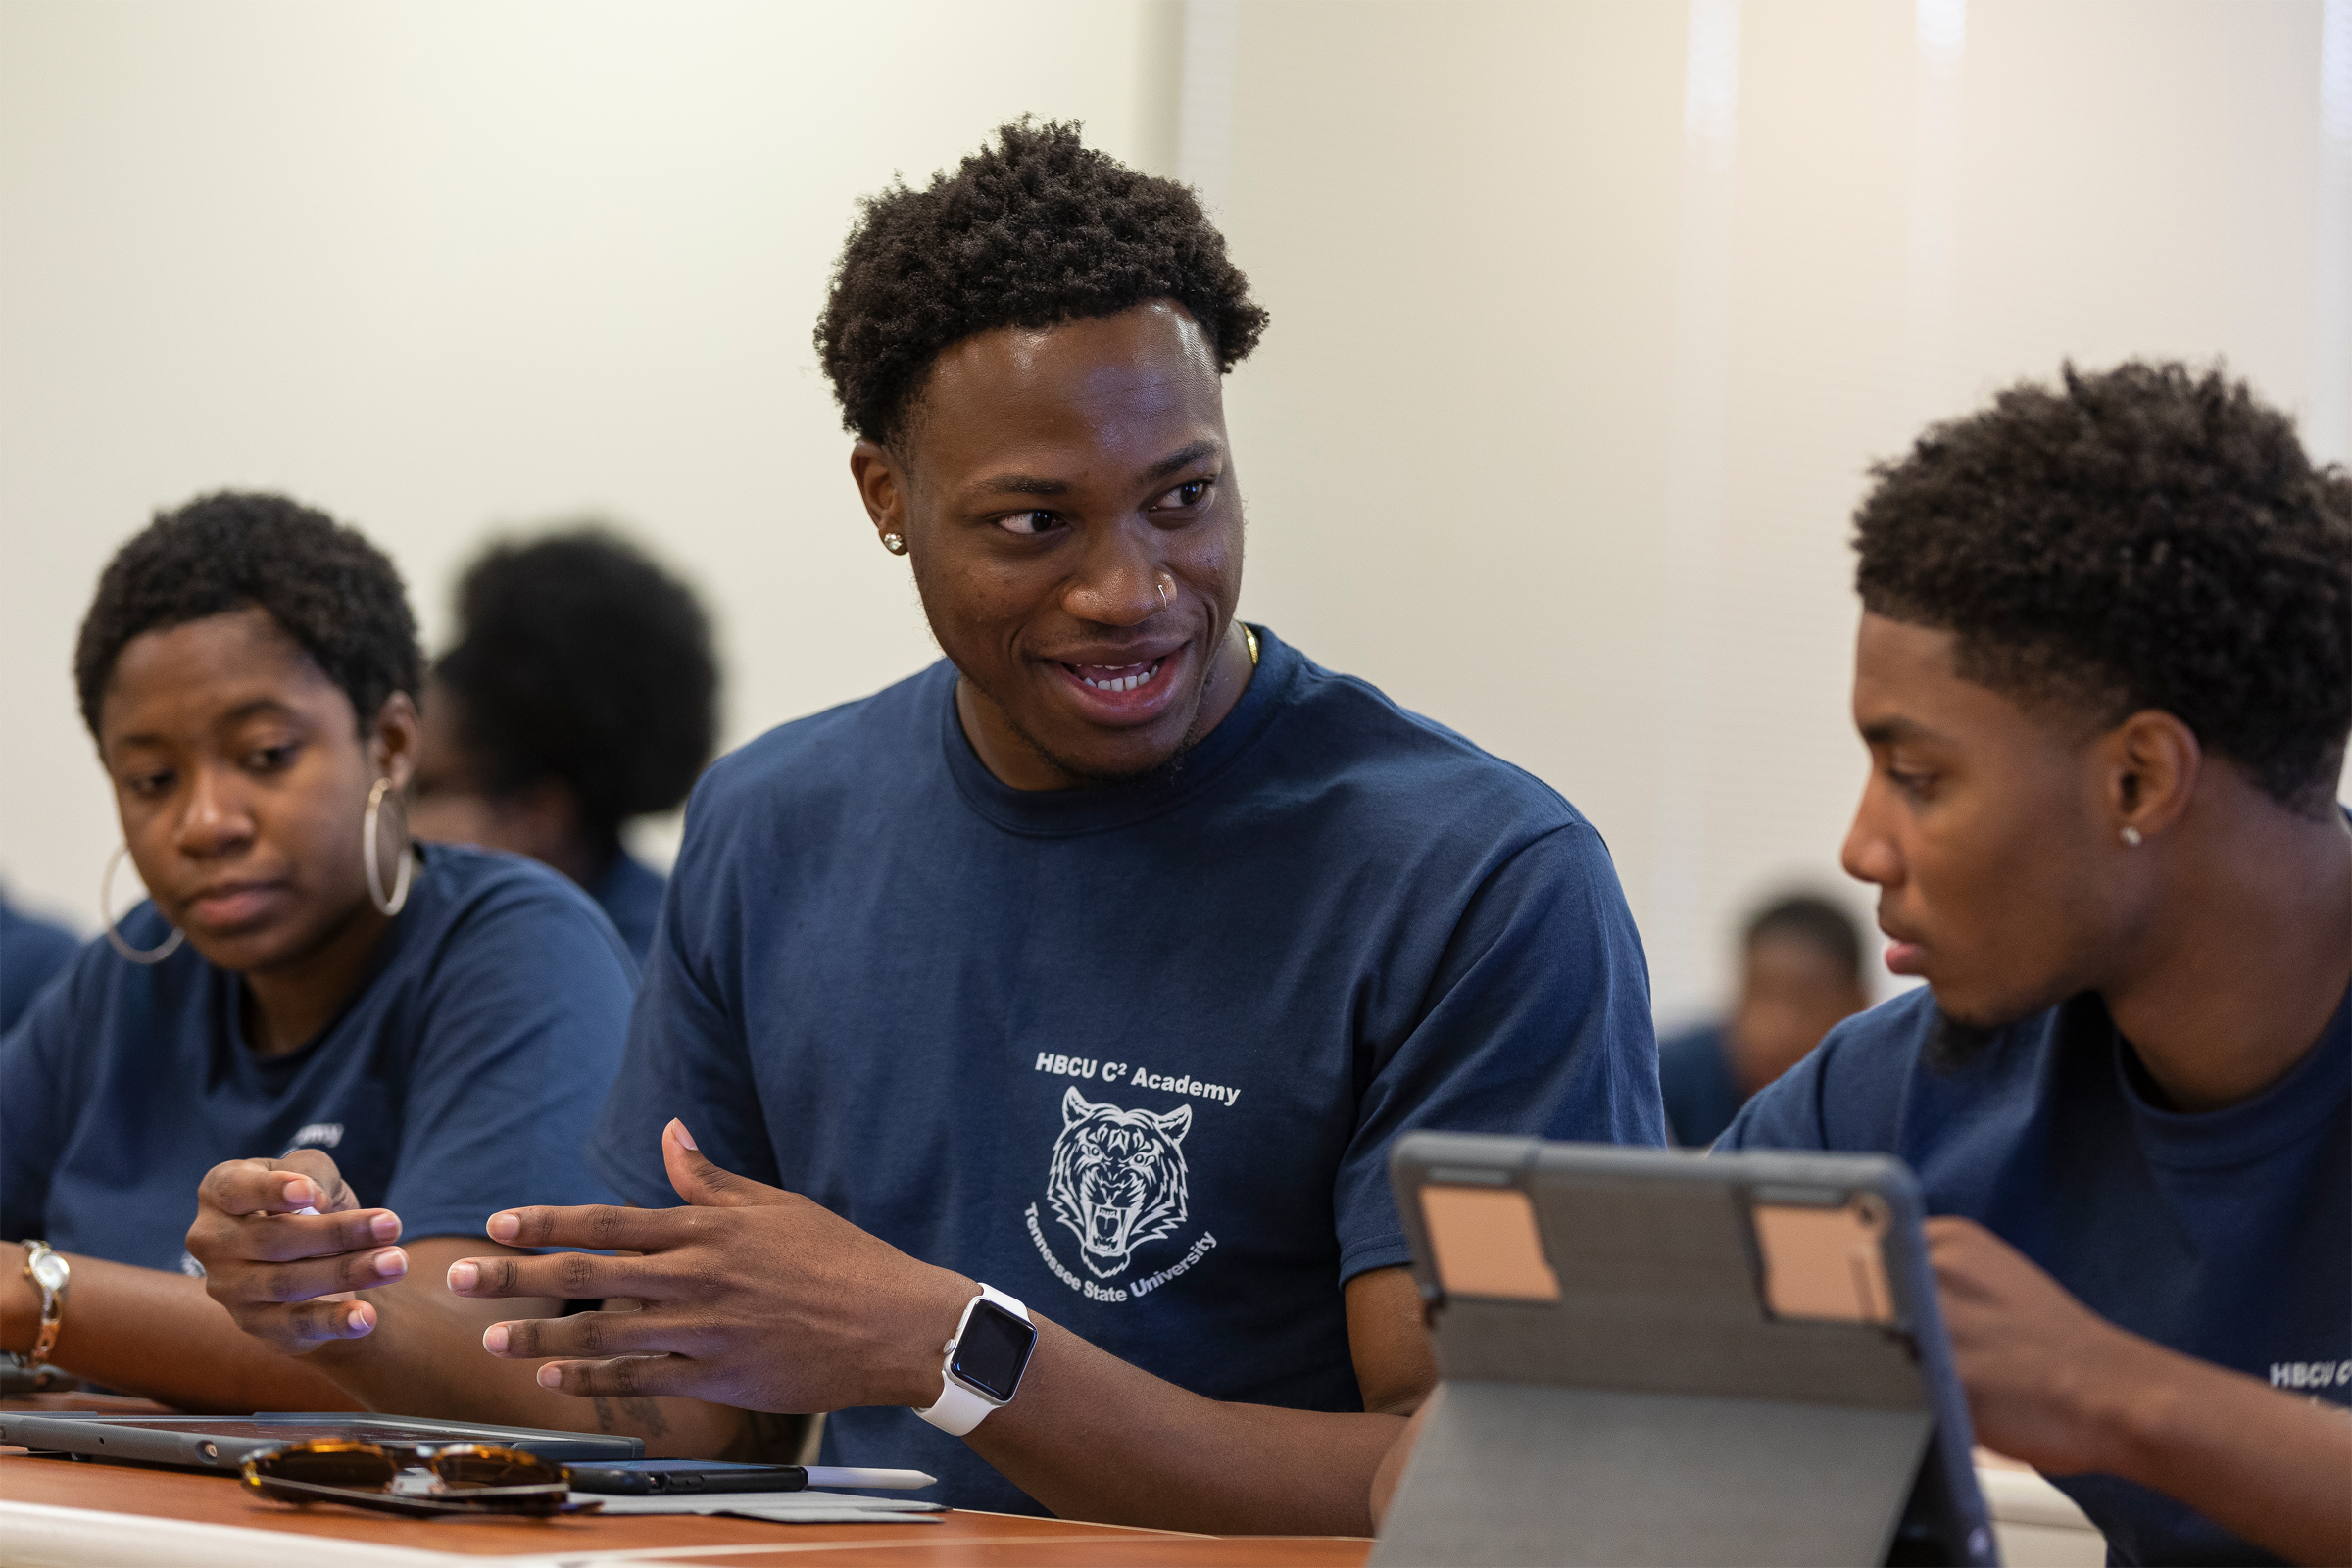 Apple Partners With HBCUs to Offer Black Students and Communities Coding and Creativity Opportunities